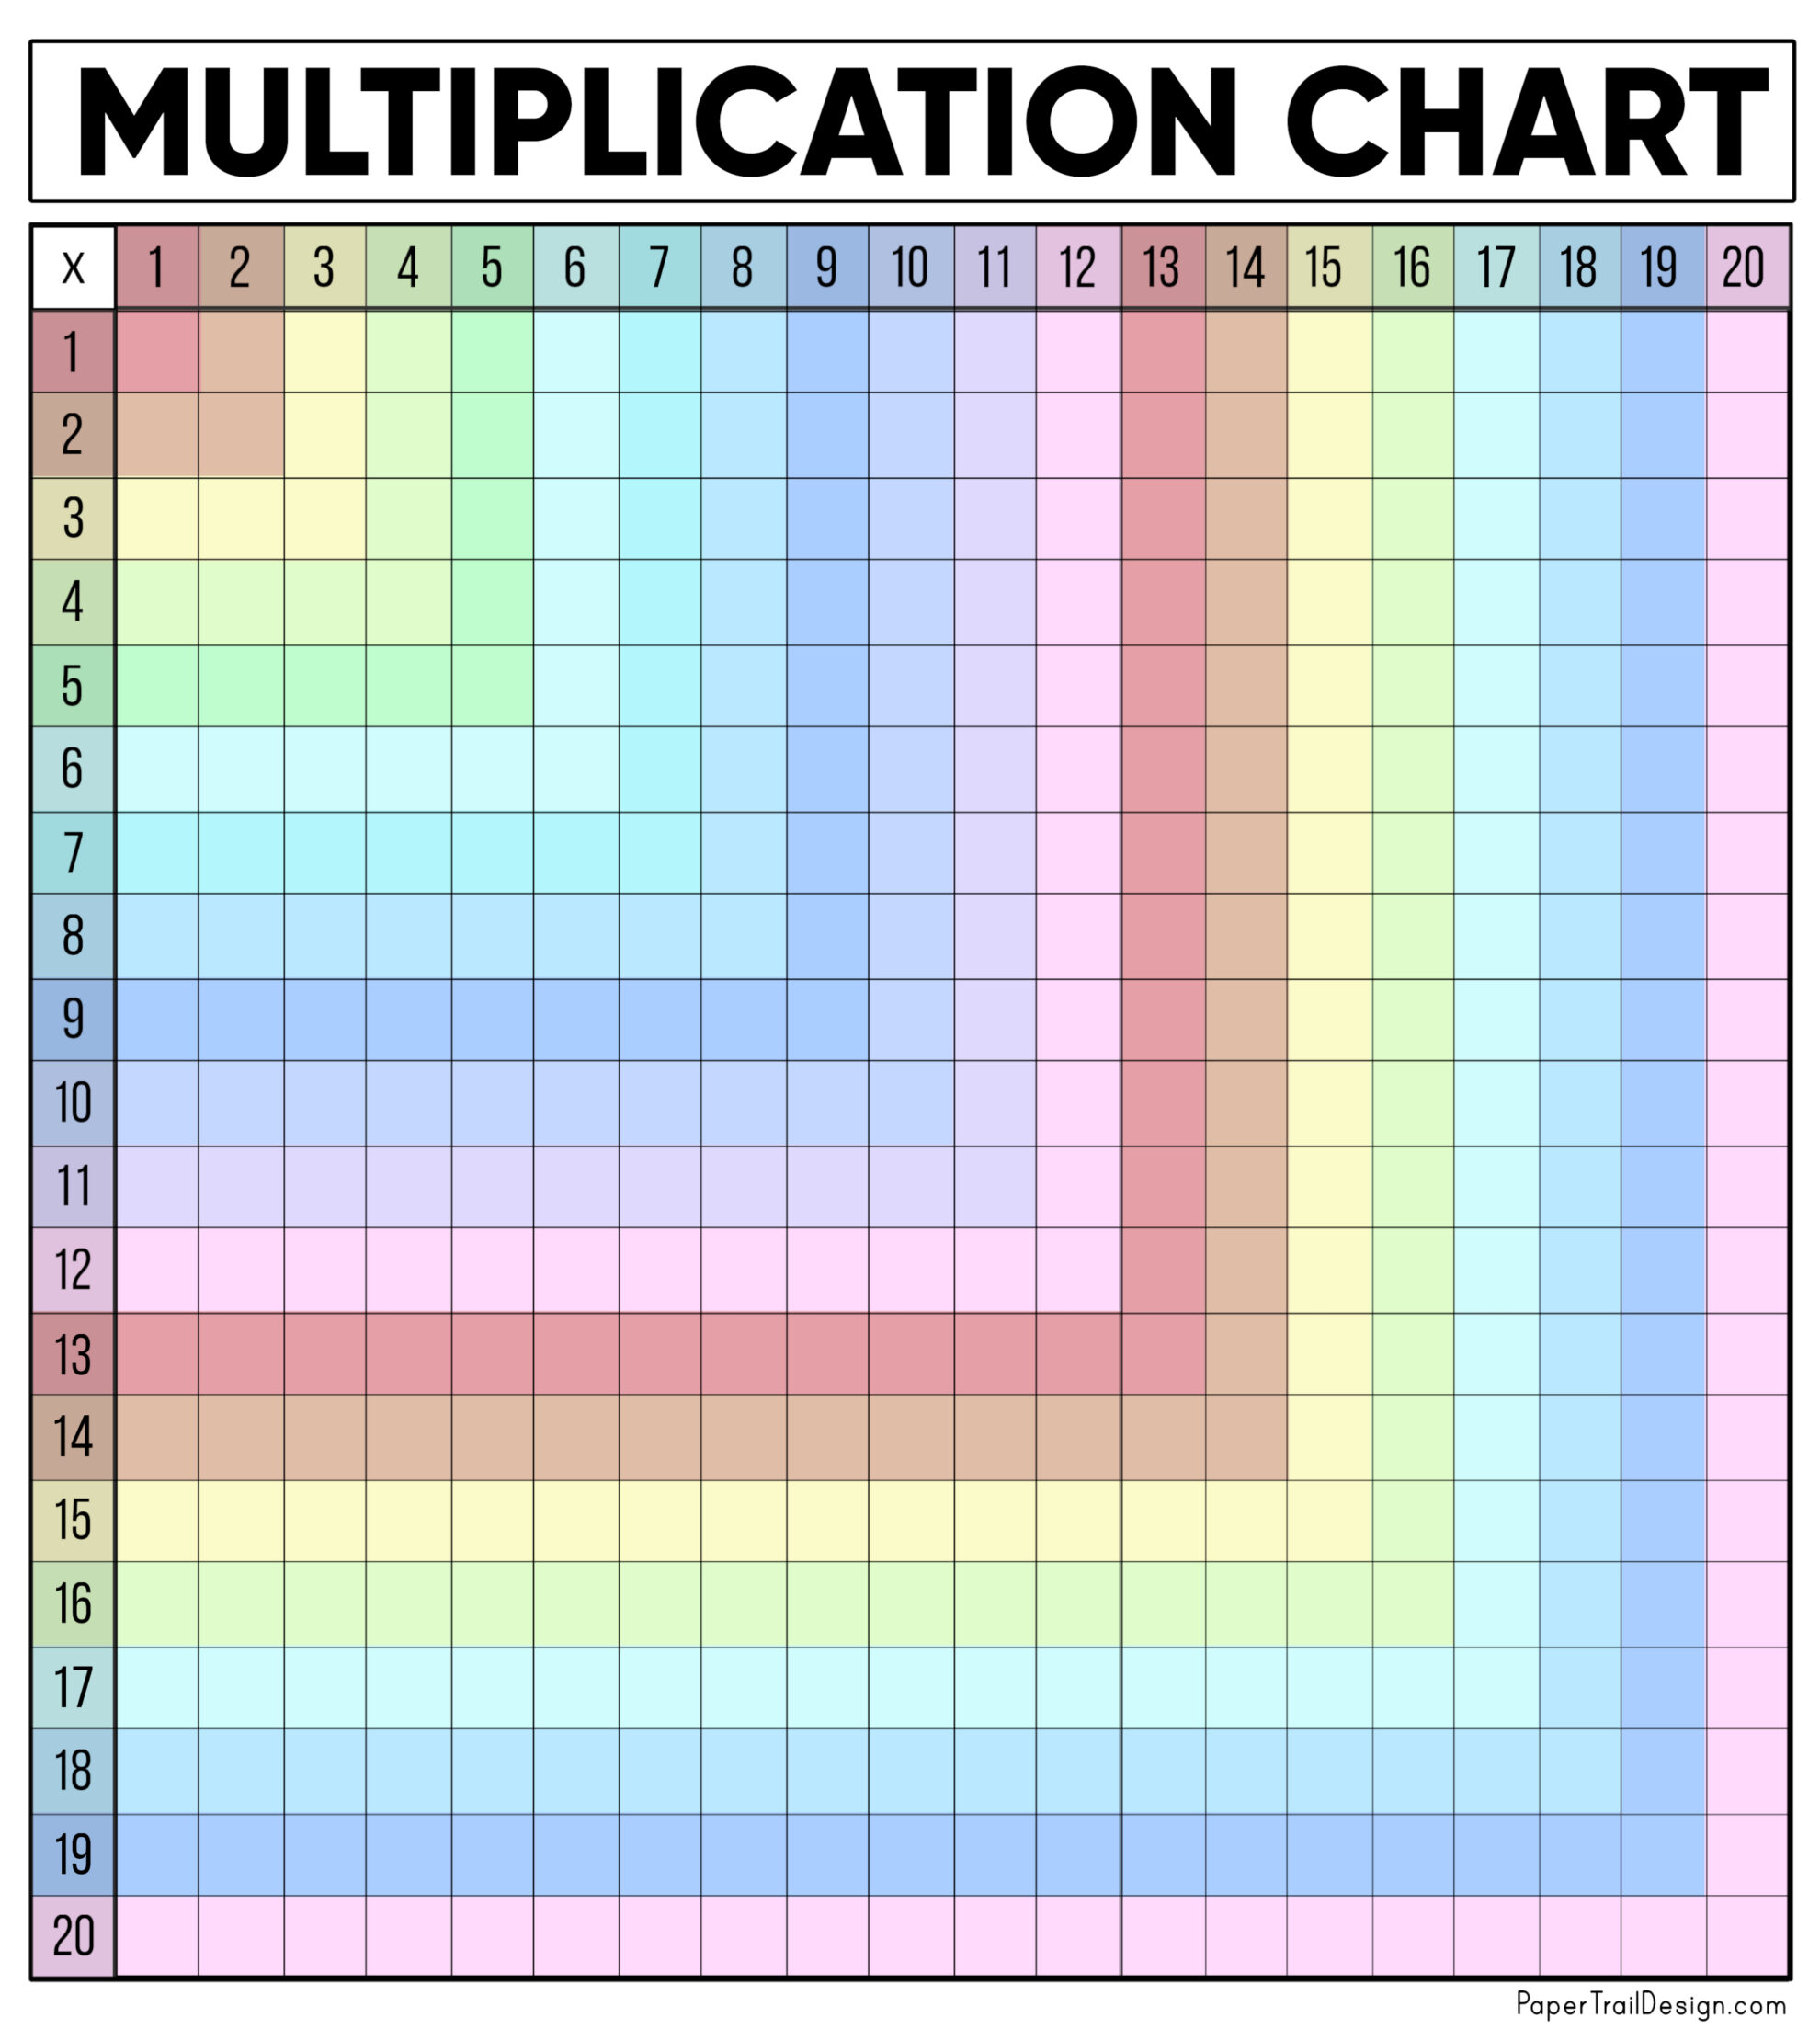 free multiplication chart printable paper trail design